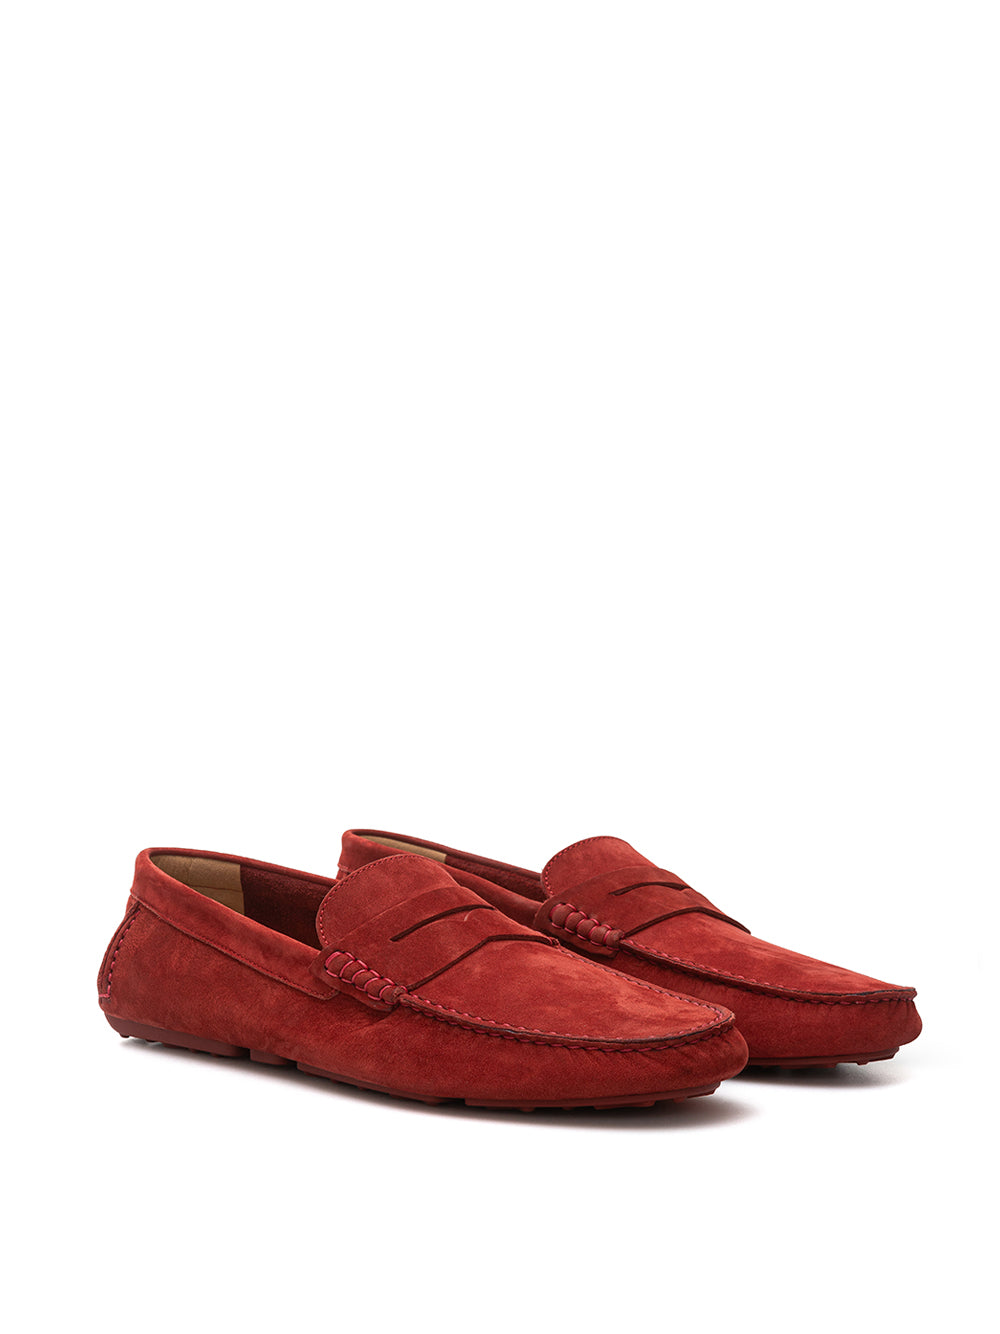 Bordeaux penny moccasin in Bally suede